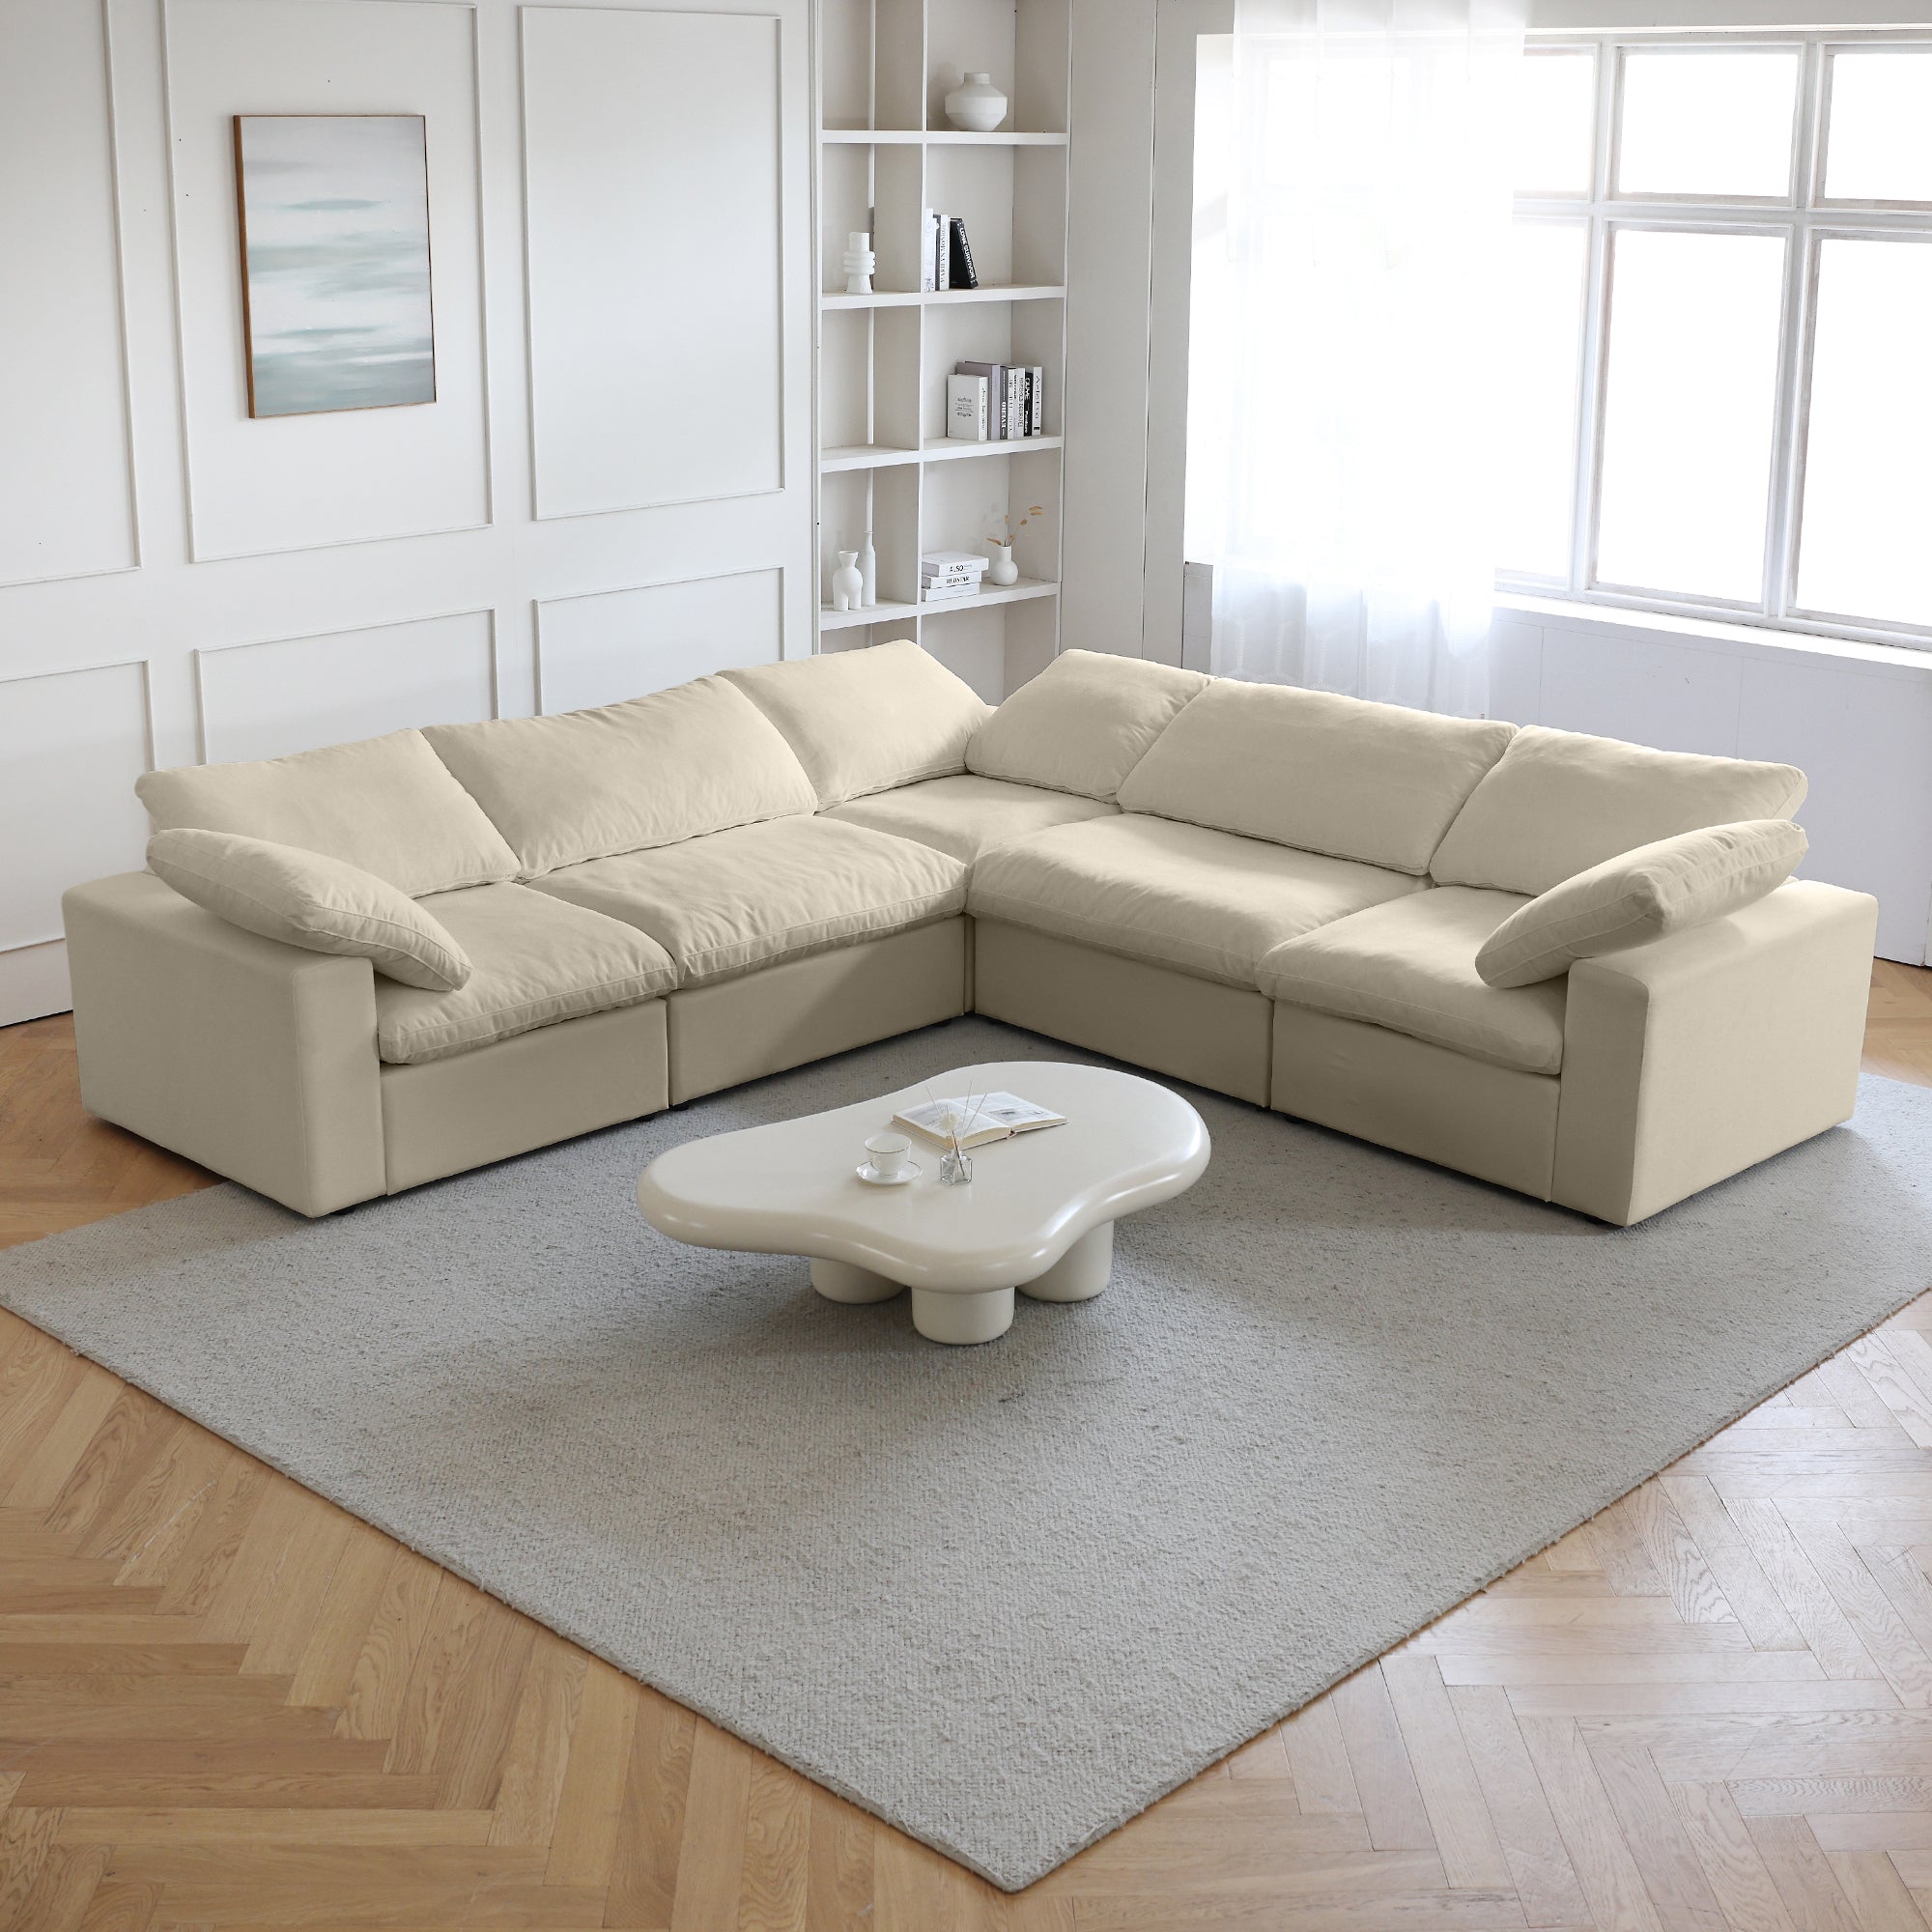 The Core Serenity Couch